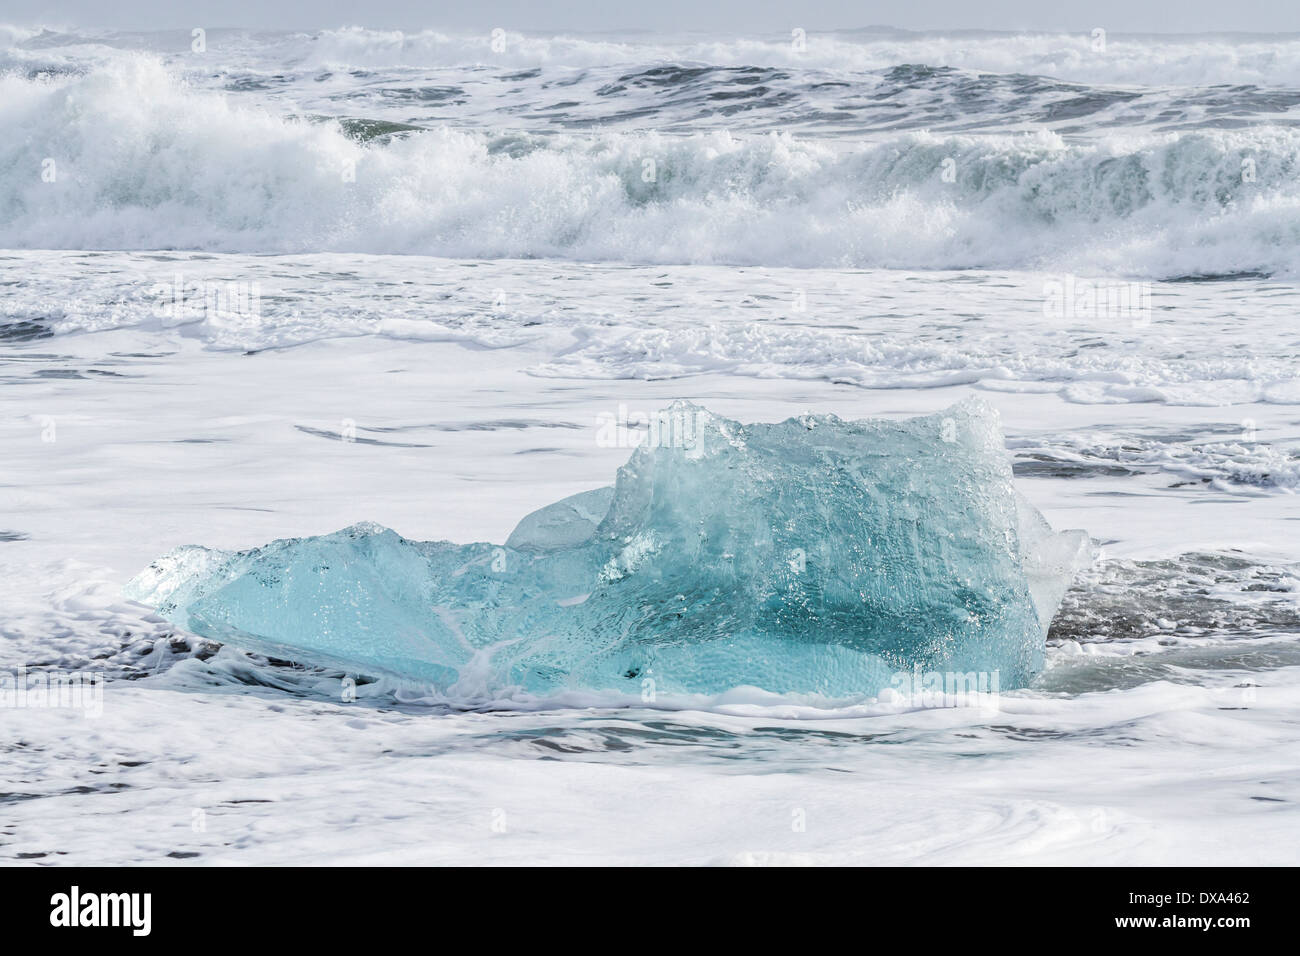 A large chunk of blue ice in the surf on the black sand beach at Jokulsarlon in South Iceland. Stock Photo